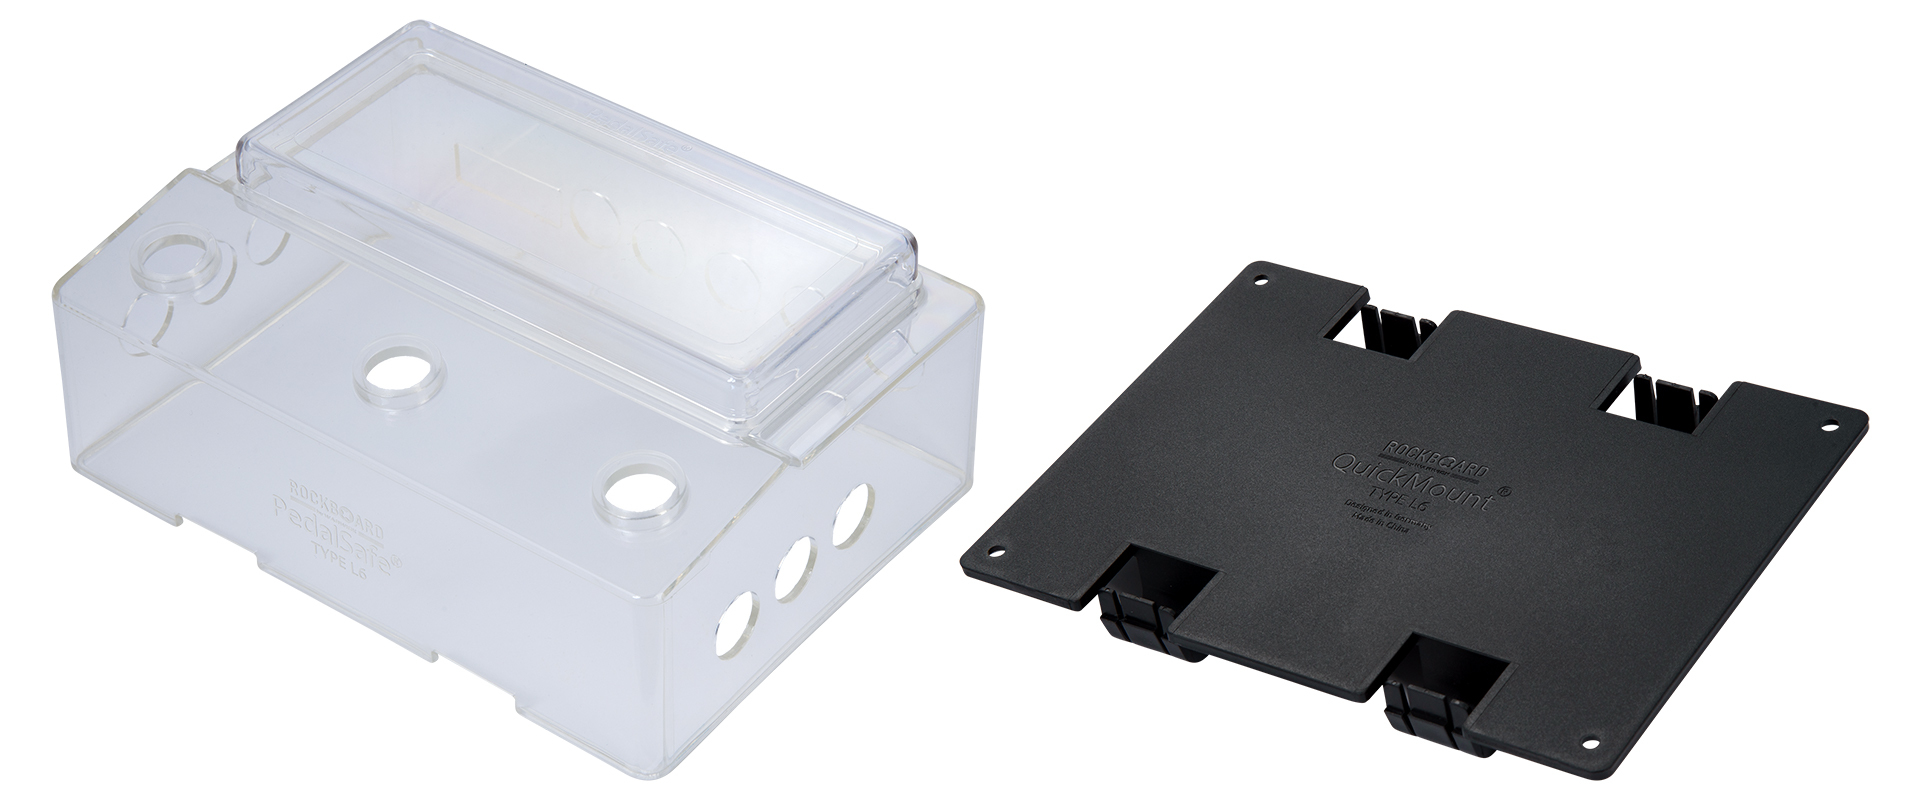 RockBoard PedalSafe Type L6 - Protective Cover and Rockboard Mounting Plate for LINE6 HX Stomp pedals